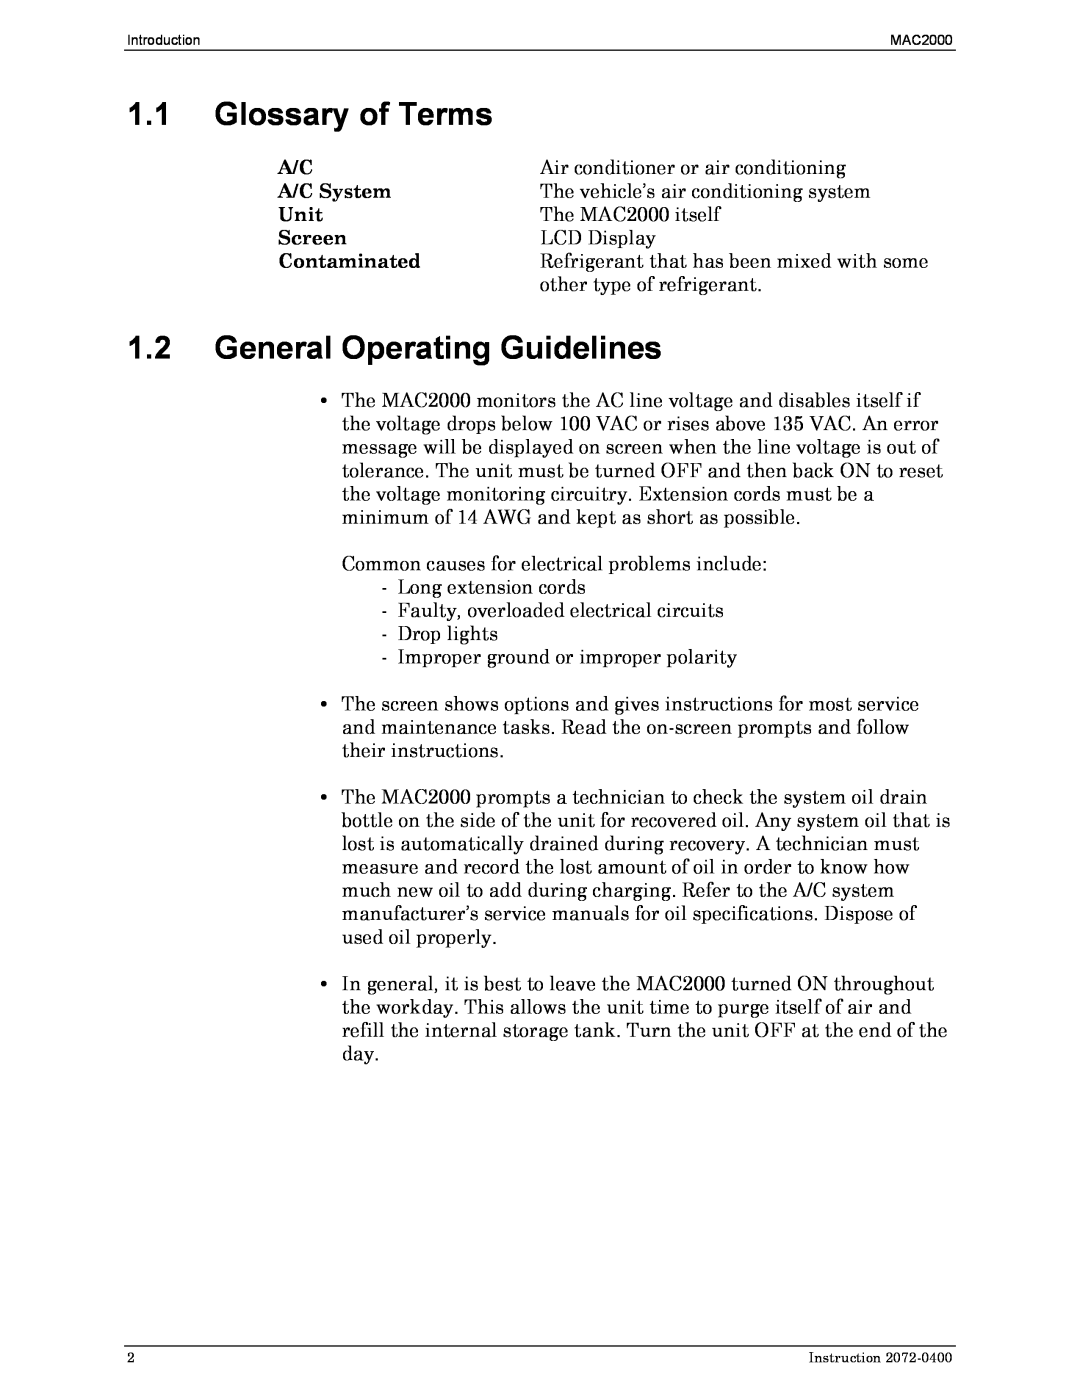 Bacharach 2072-0400 manual 1.1Glossary of Terms, 1.2General Operating Guidelines, A/C System, Unit, Screen, Contaminated 